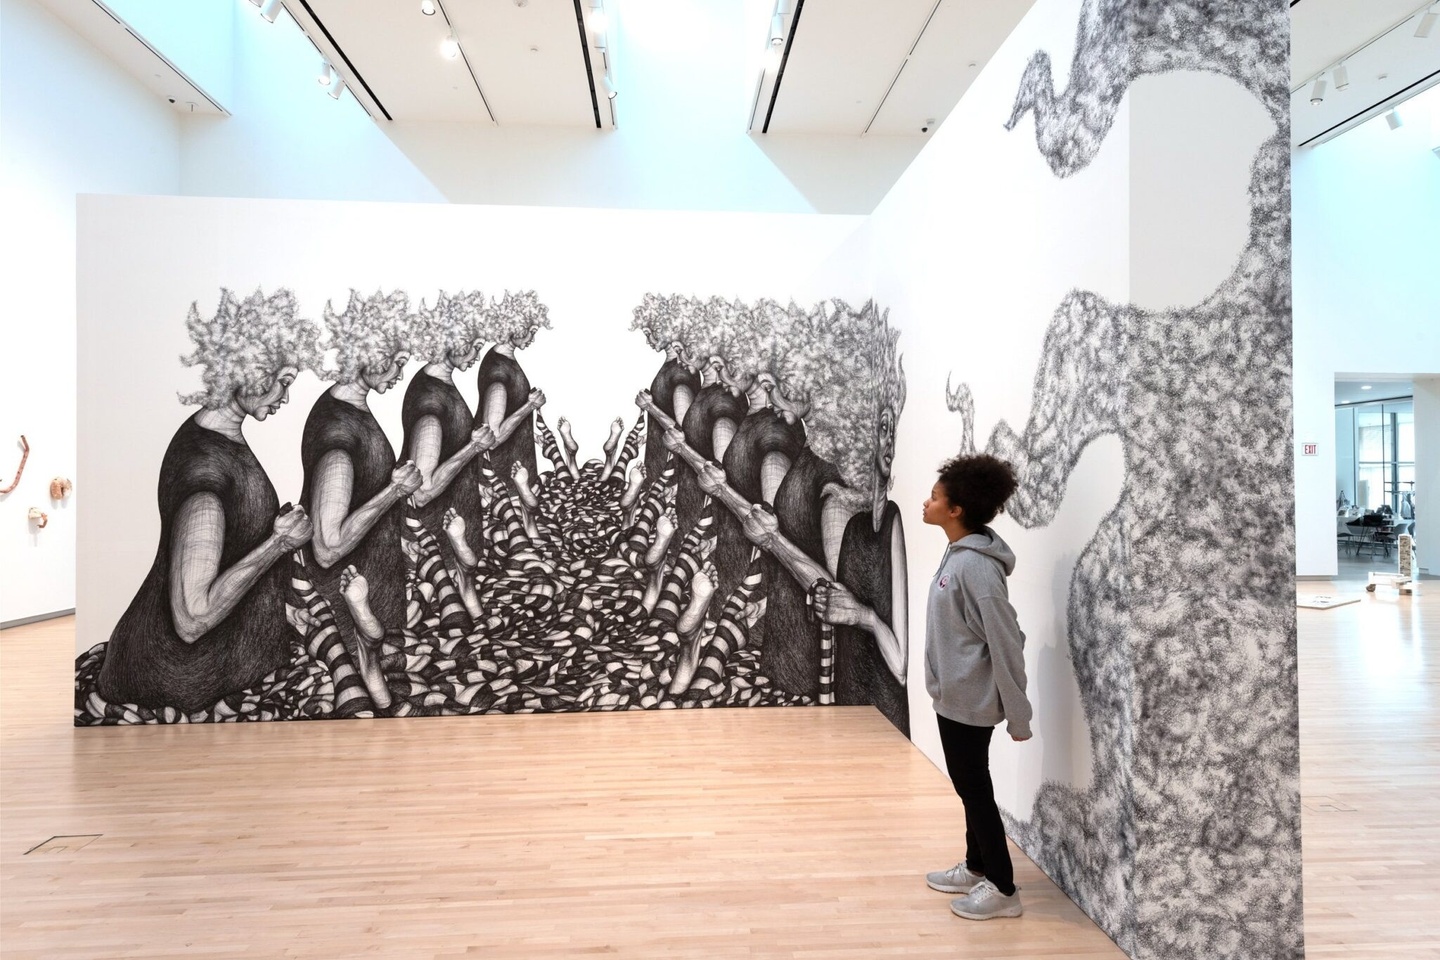 Inside a museum, a young Black woman stands next to a larger-than-life, black & white drawing installation composed on an L-shaped section of wall. On one wall, two rows of Black women remove striped socks from unseen figures' feet in an almost assembly line fashion. On the adjacent wall, a cloudlike formation of hair curls around the corner.